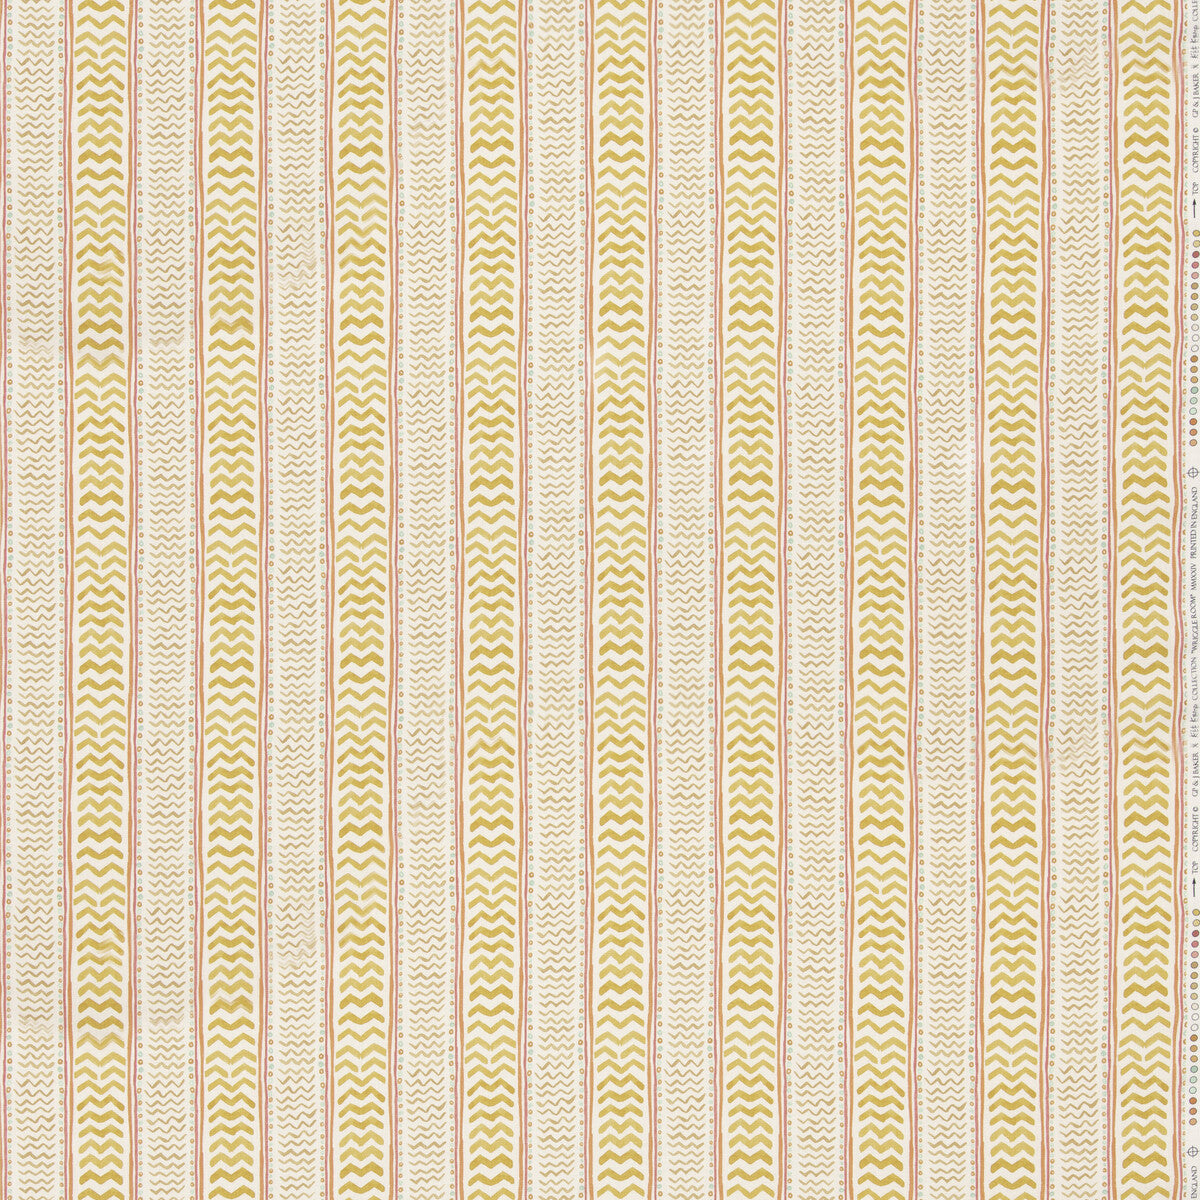 Wriggle Room fabric in ochre color - pattern BP11050.2.0 - by G P &amp; J Baker in the X Kit Kemp Prints And Embroideries collection